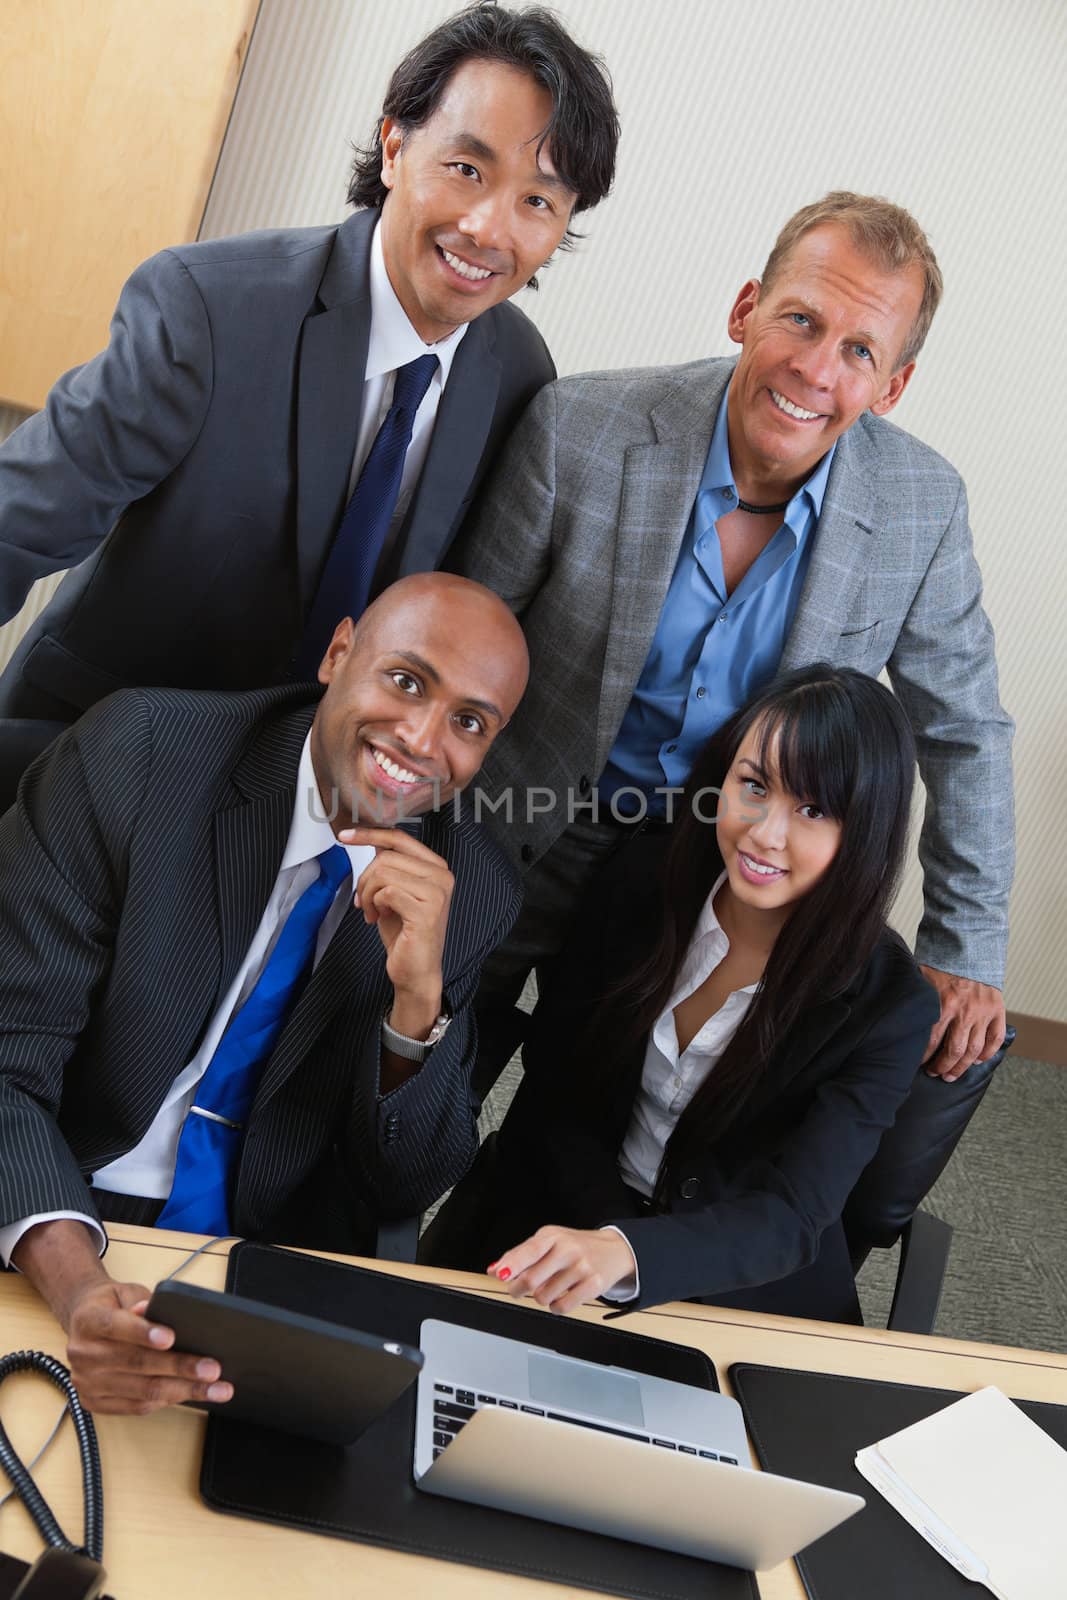 Portrait of happy business people working on laptop together